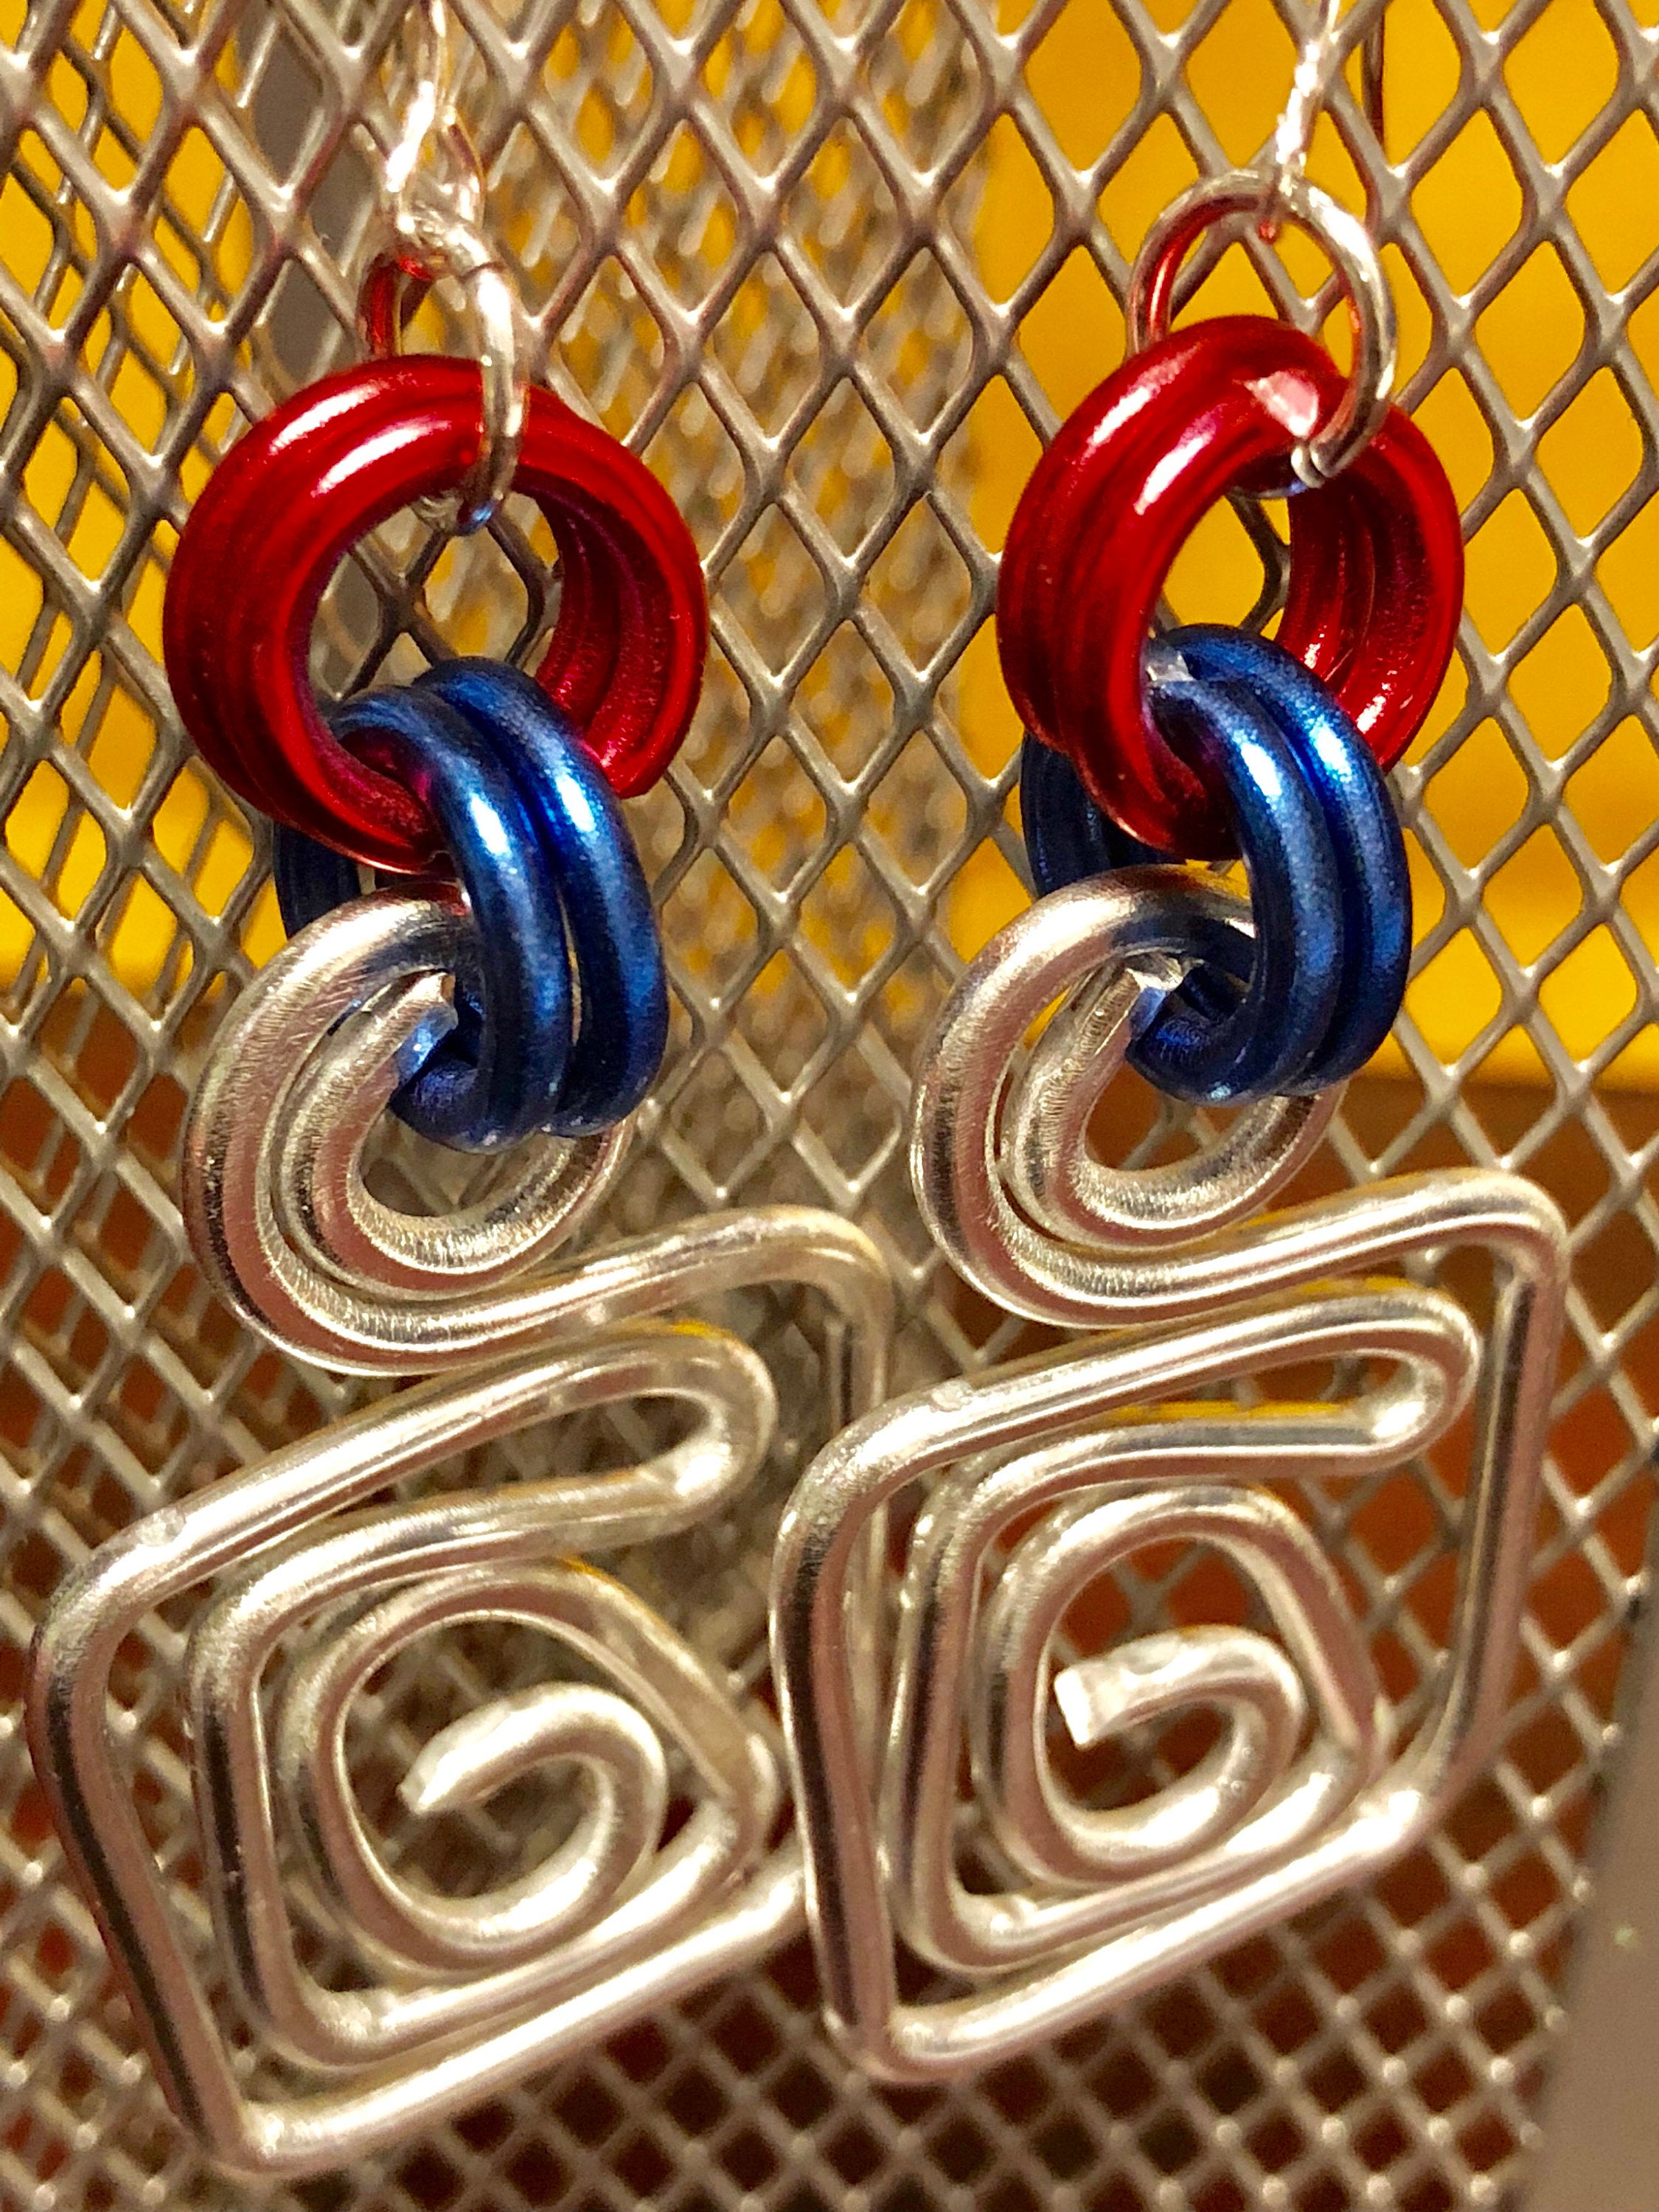 Small Square Silver Earrings with Red and Blue accents, Great for 4th of July